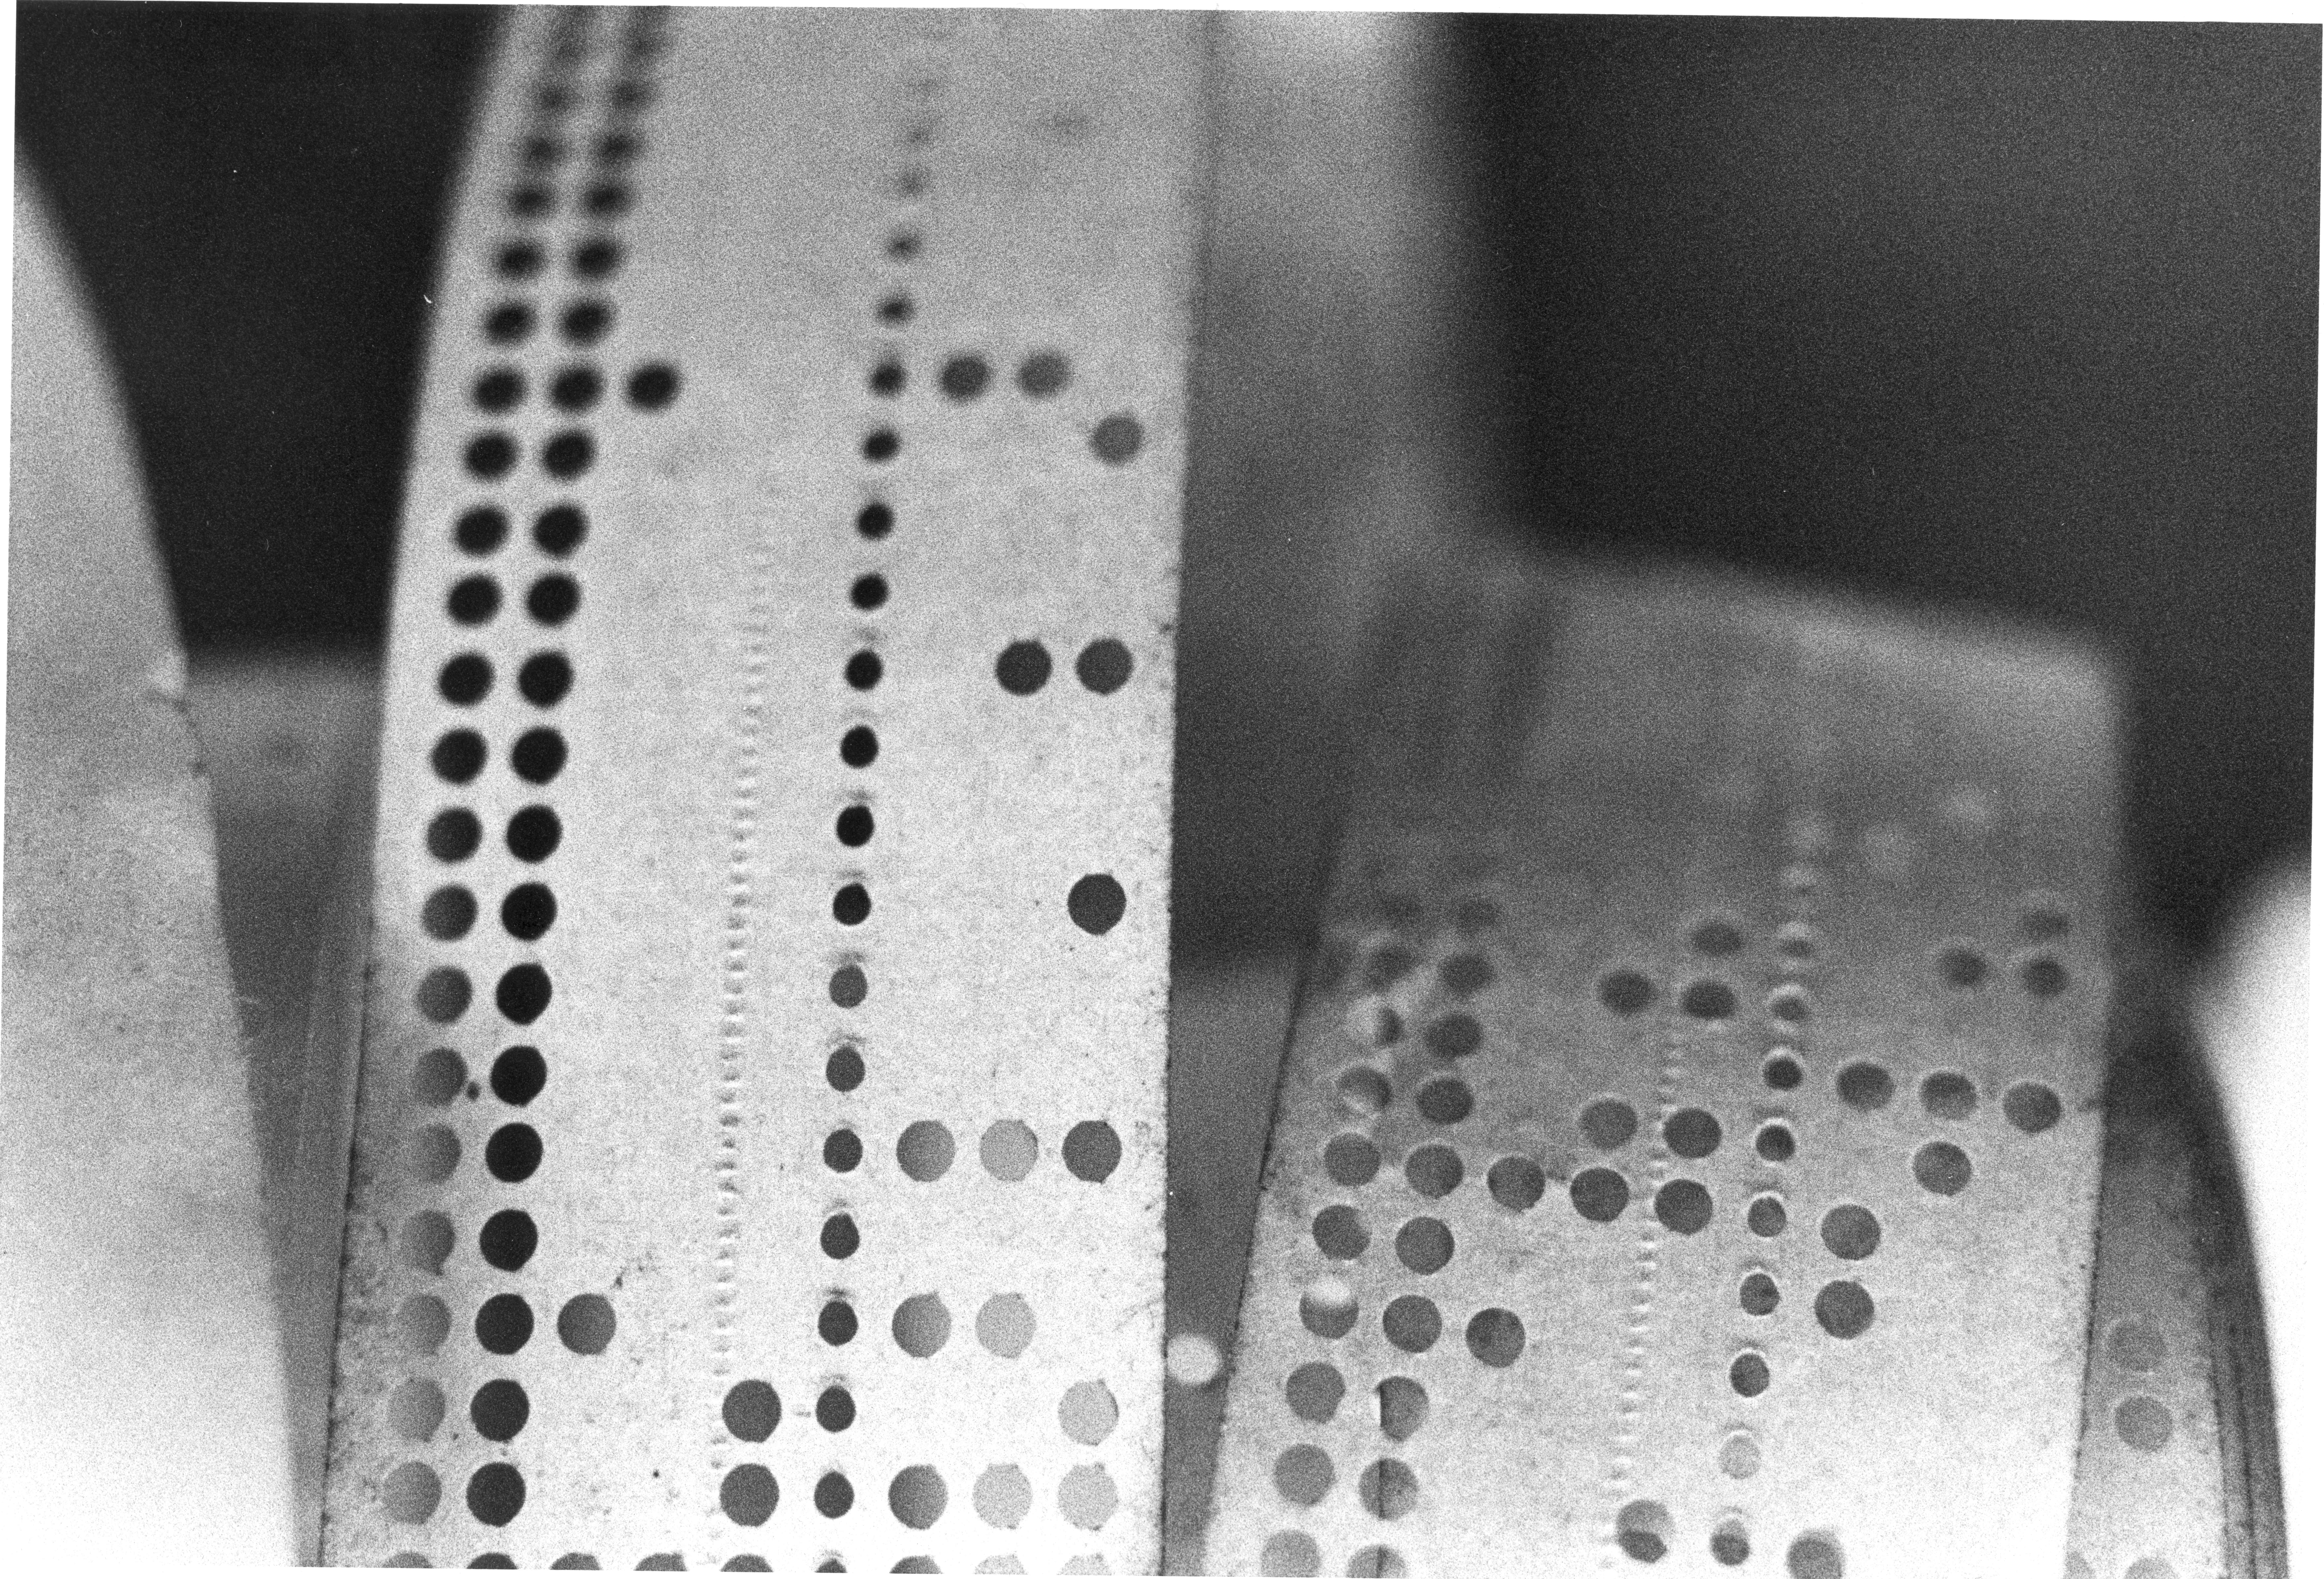 Computer punch cards